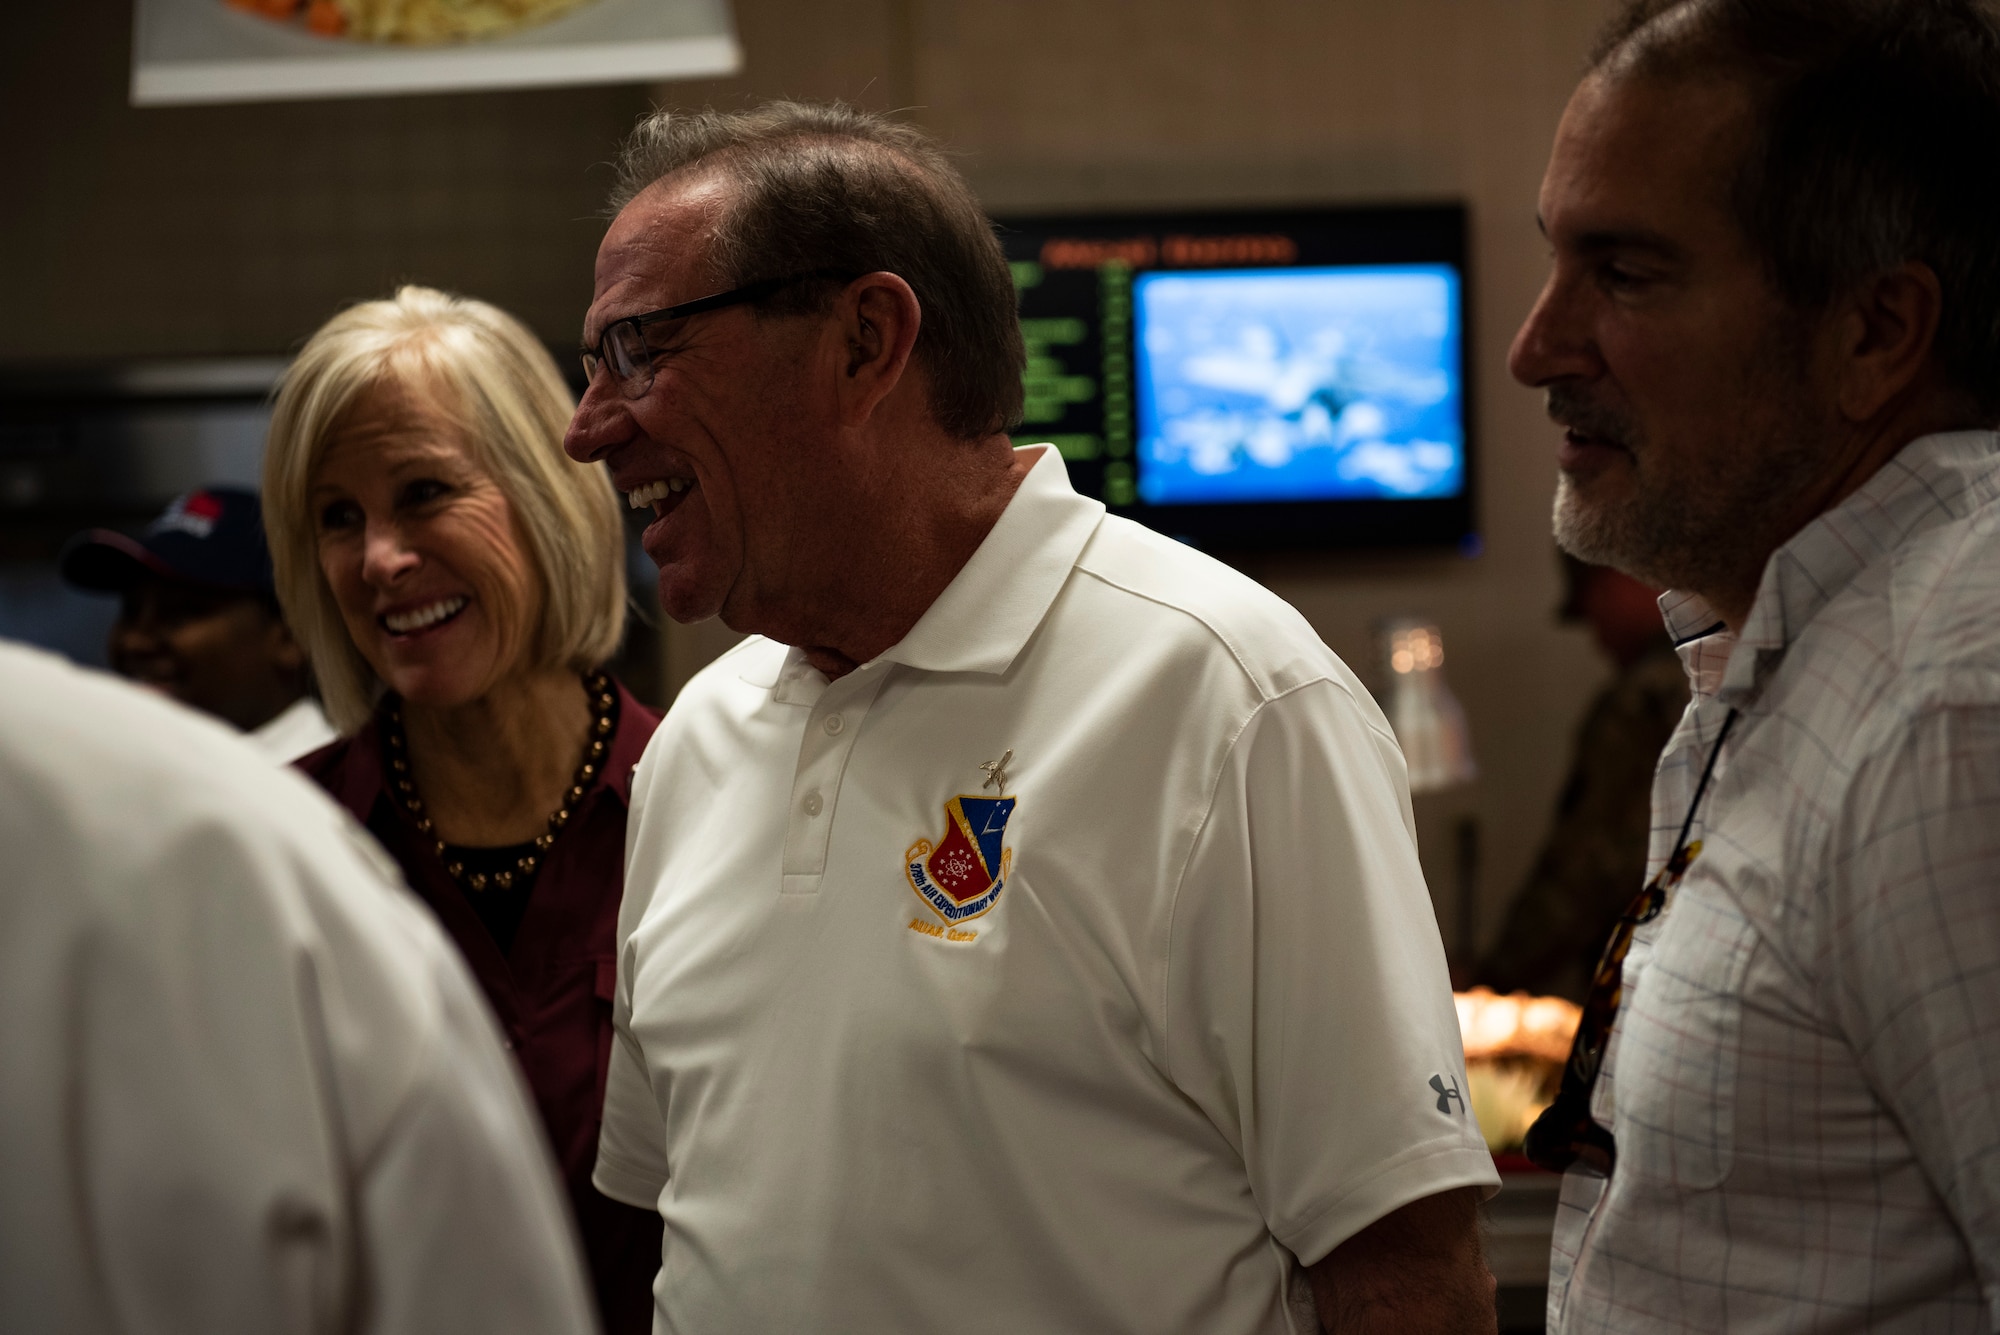 Leah Dunn, left, Florida Congressman Neal Dunn, center, and Dr. Daniel Daube, right, attend the 325th Force Support Squadron's holiday meal celebration at Tyndall Air Force Base, Florida, Nov. 28, 2019. Meal attendees were served by commanders, chiefs, first sergeants, and special guests of the 325th Fighter Wing, to honor the service and sacrifice of military members past and present. (U.S. Air Force photo by Staff Sgt. Magen M. Reeves)